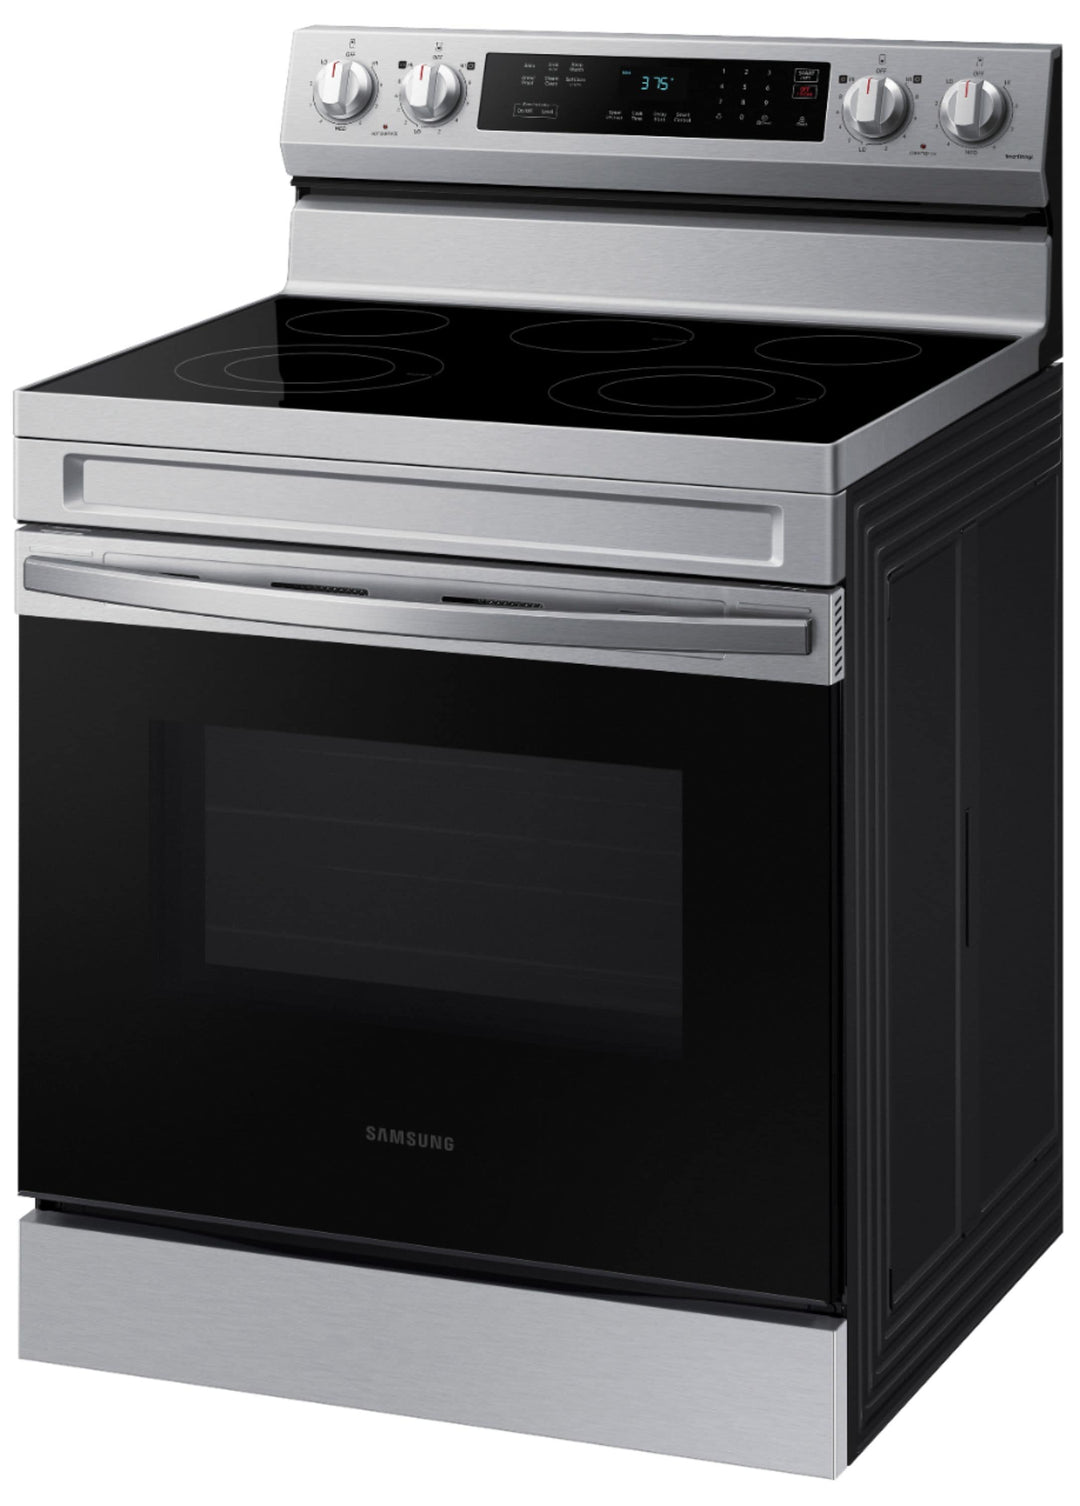 Samsung - 6.3 cu. ft. Freestanding Electric Range with Rapid Boil™, WiFi & Self Clean - Stainless steel_5